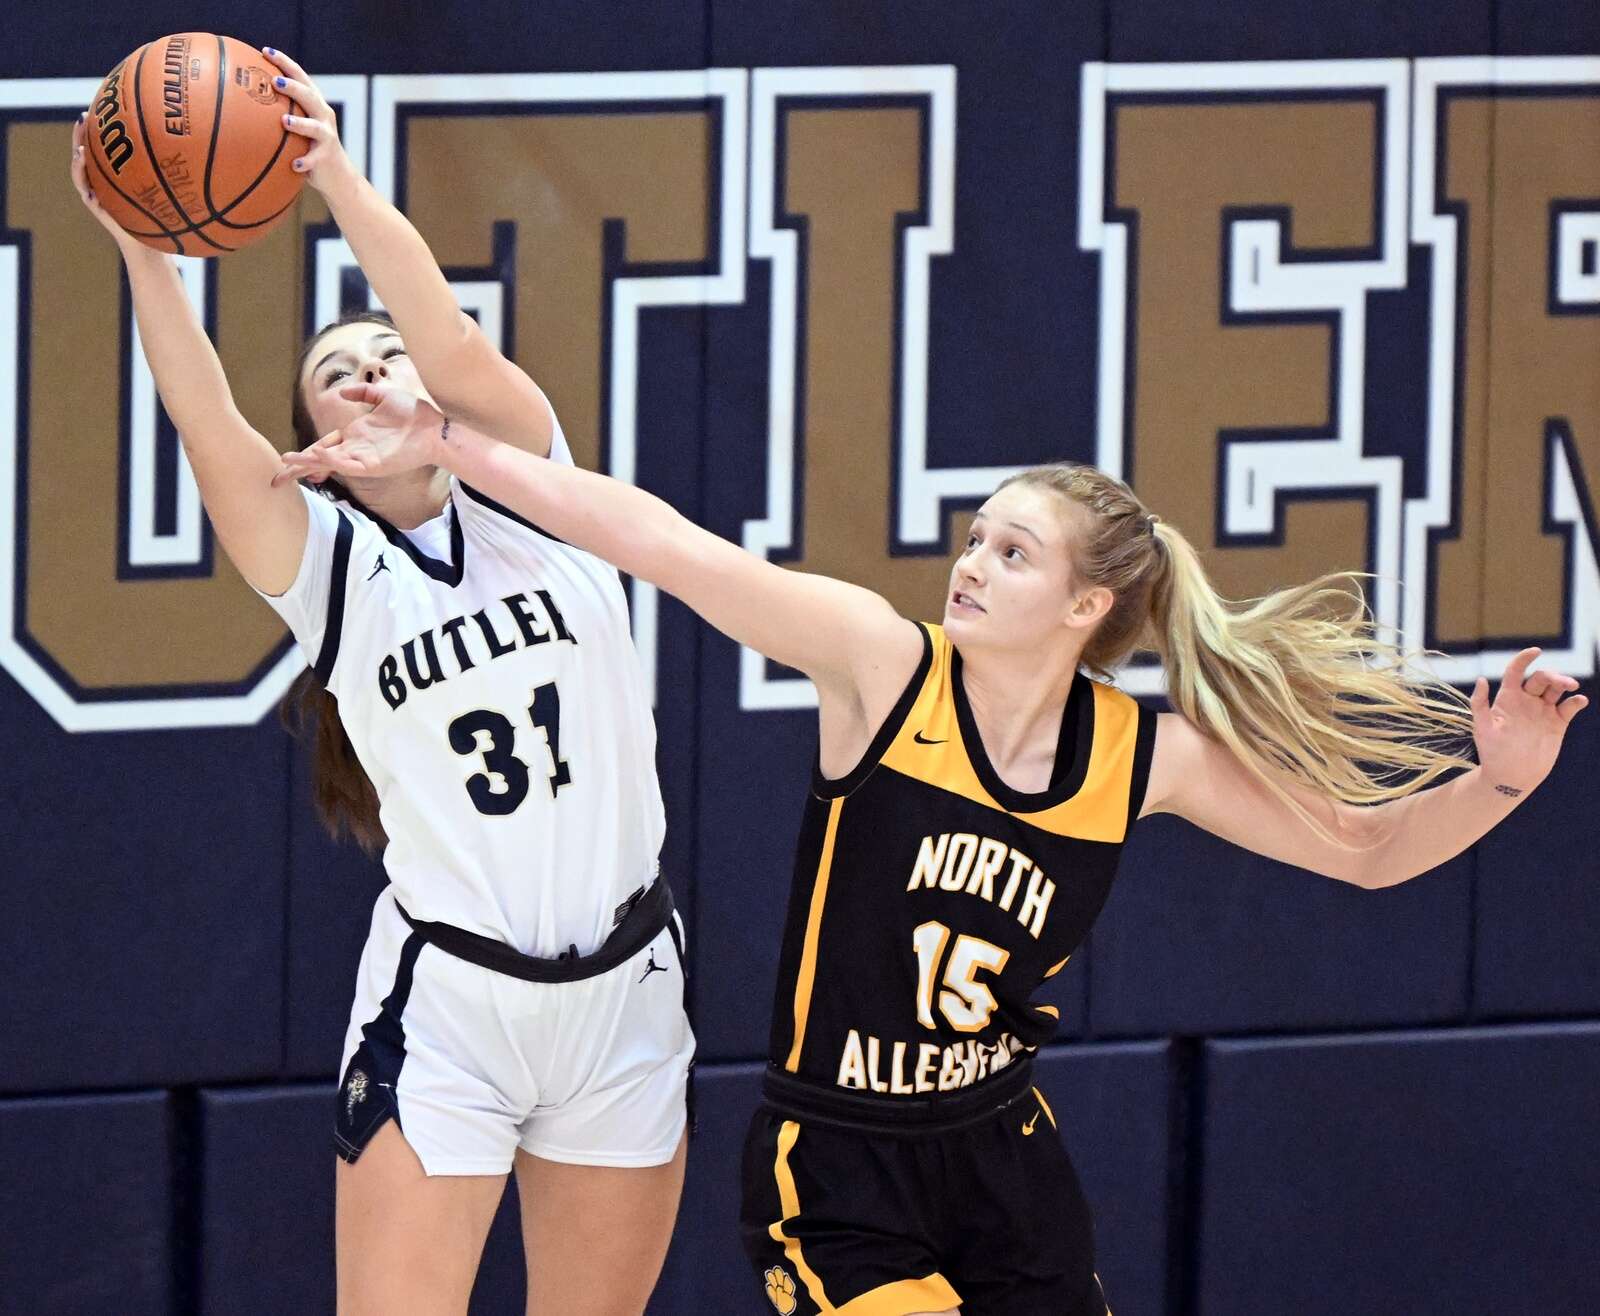 Butler #31 Avery Maier fights for a rebound against  North Allegheny #15 Lydia Betz